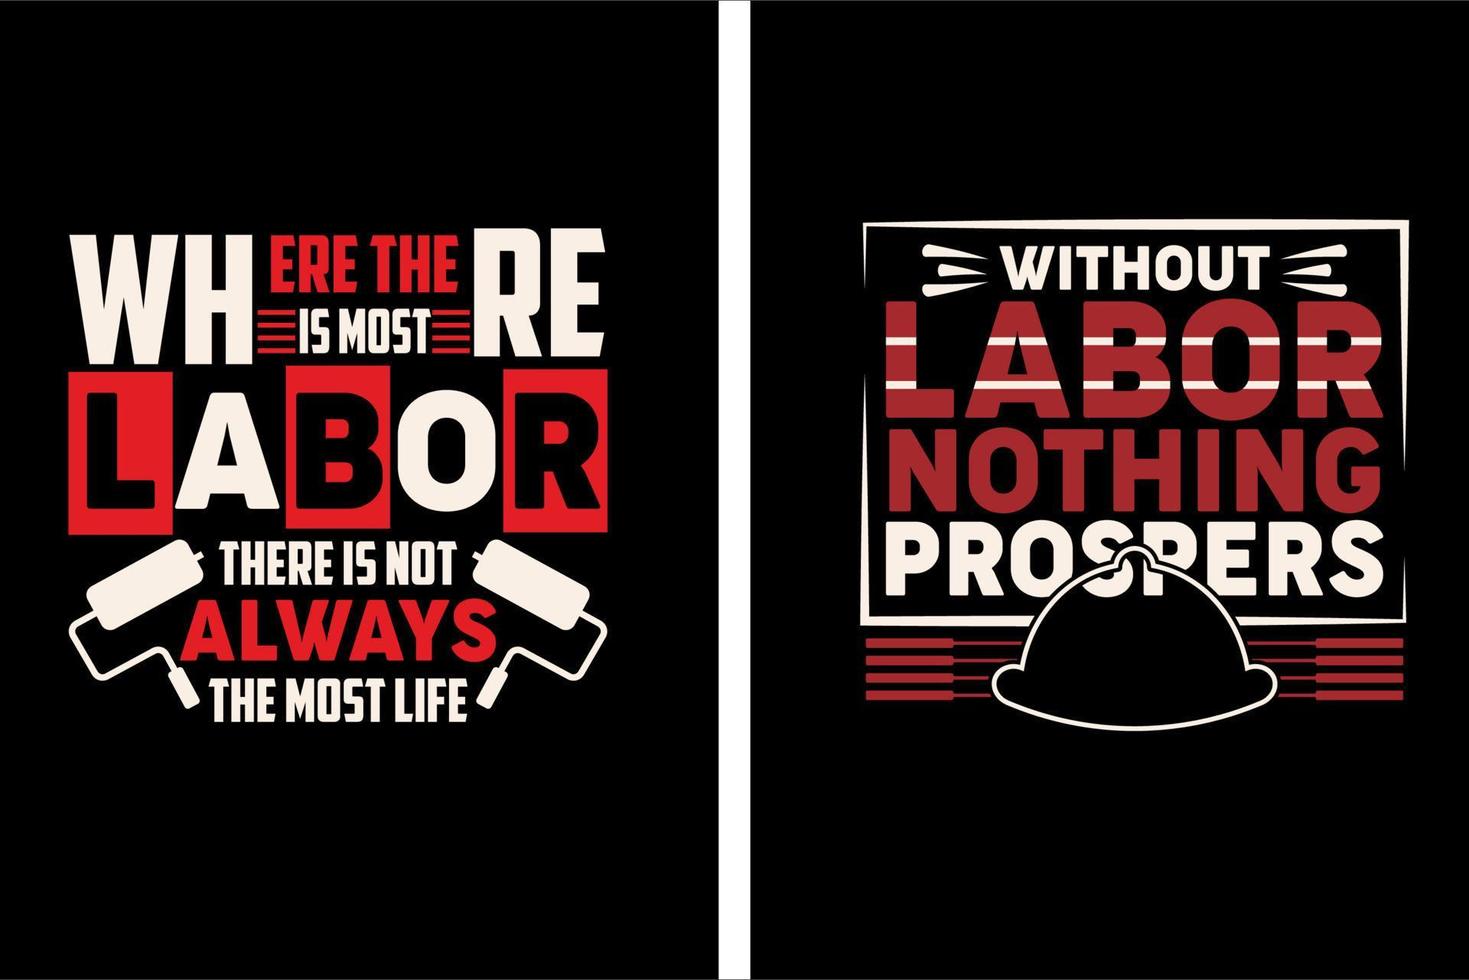 This is labor day t shirt design. vector